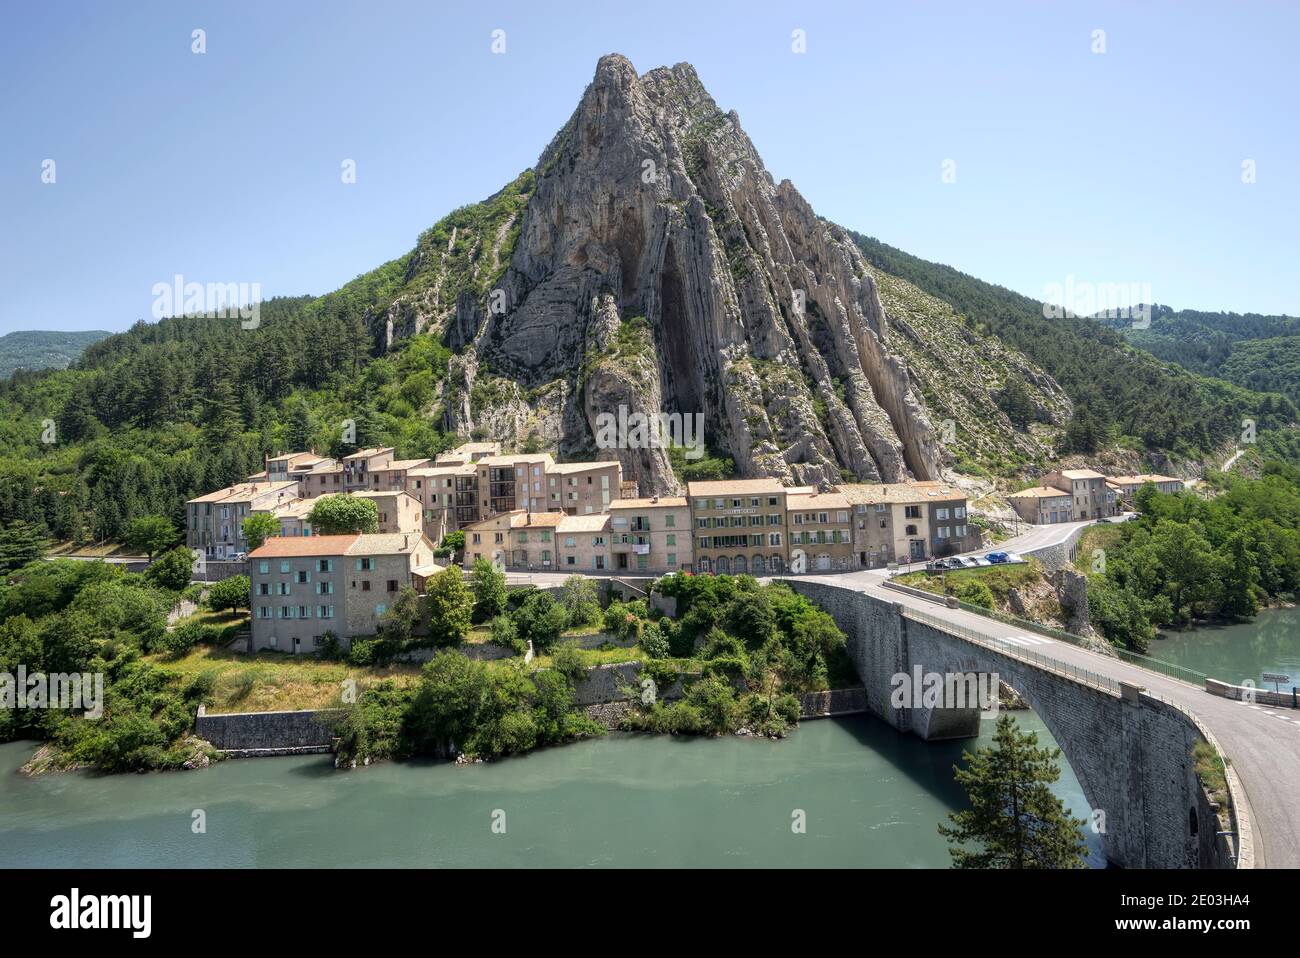 Small village next to Durance River and bridge at foot of cone shaped mountain in Sisteron Provence France in the foothills of the French Alps Stock Photo